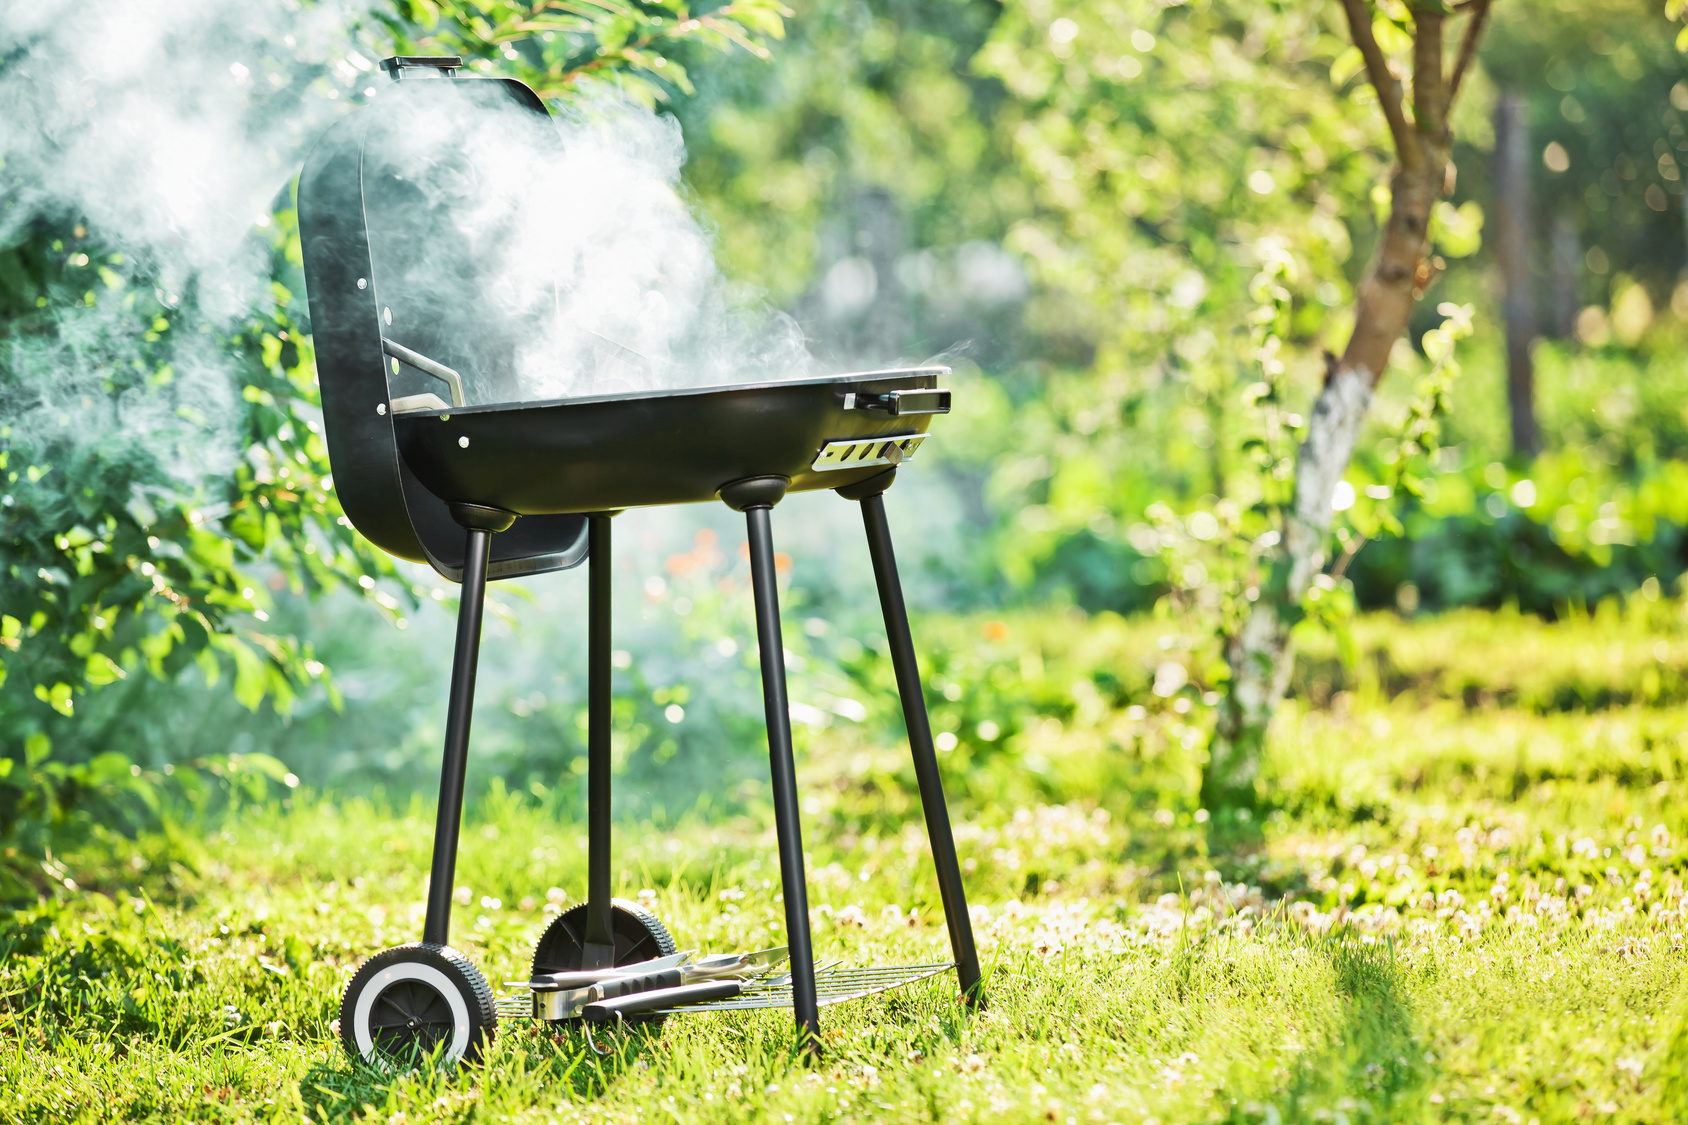 Grilling Safety Tips For Labor Day